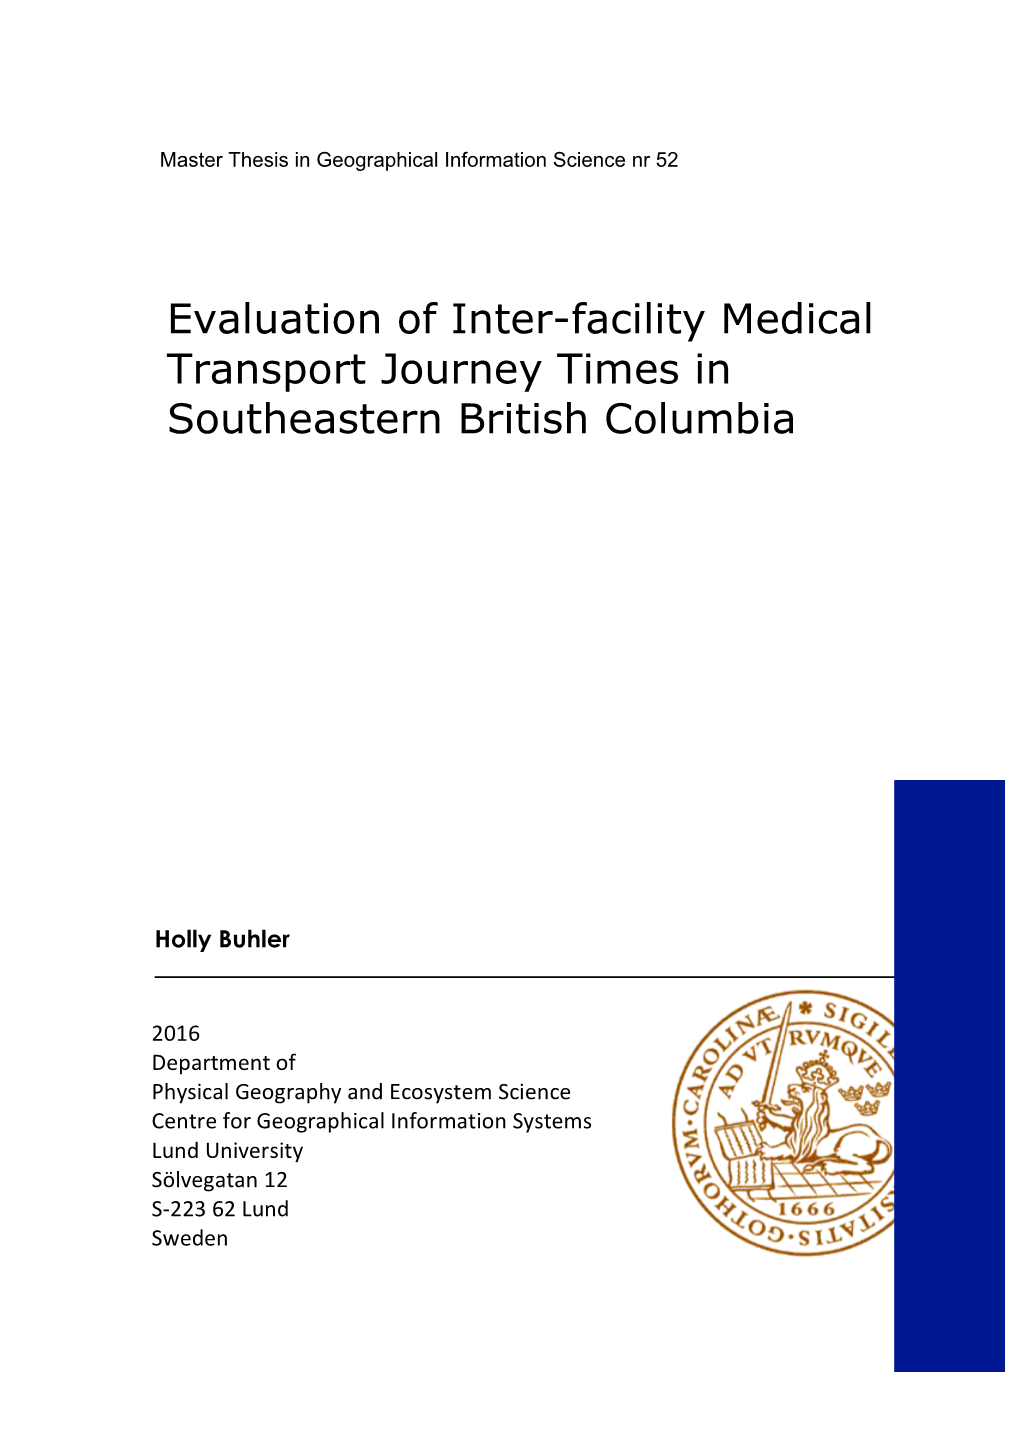 Evaluation of Inter-Facility Medical Transport Journey Times in Southeastern British Columbia